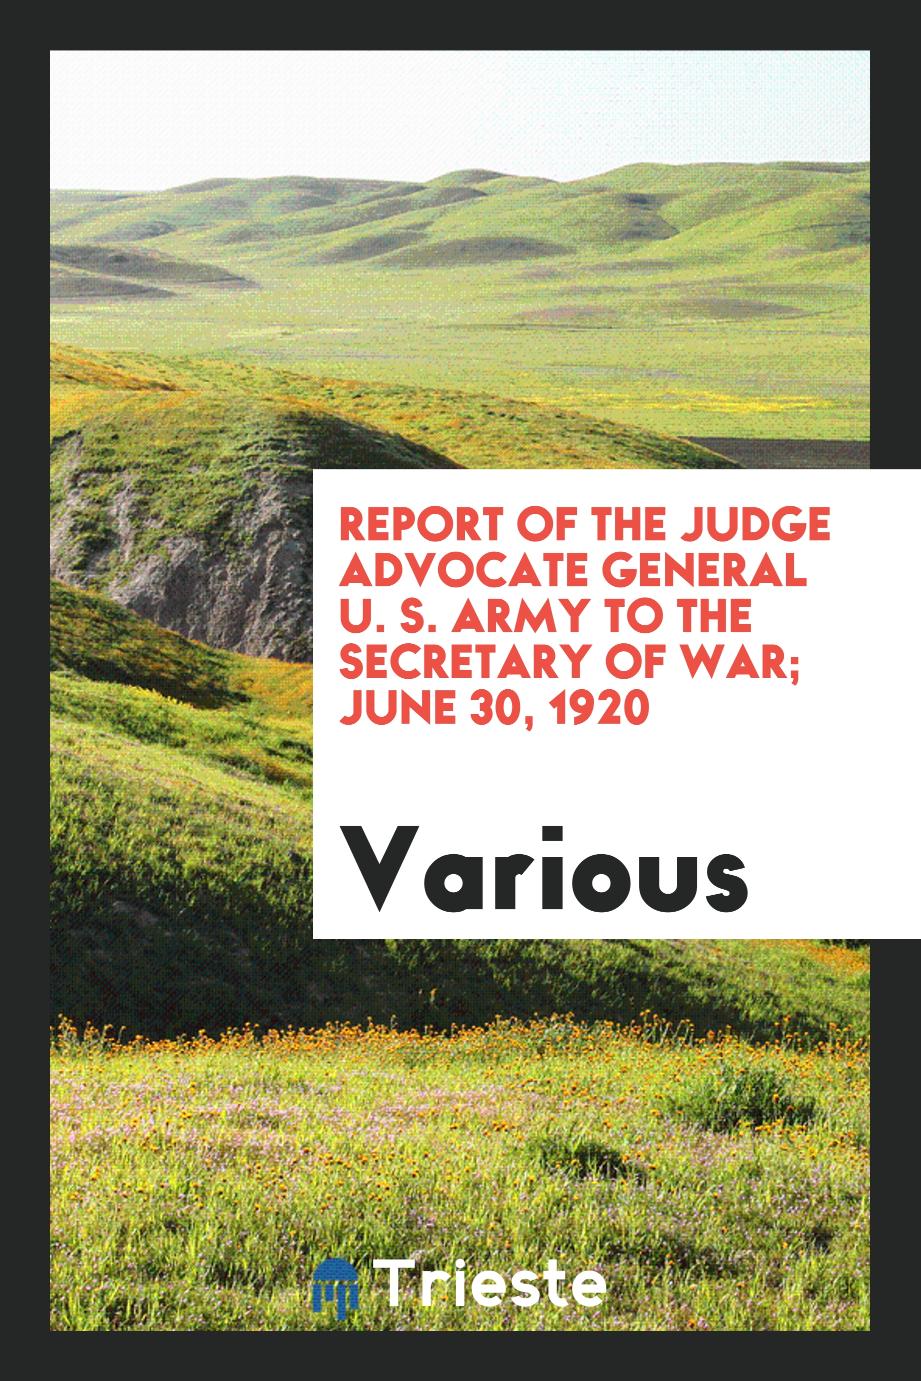 Report of the Judge Advocate General U. S. Army to the Secretary of War; June 30, 1920